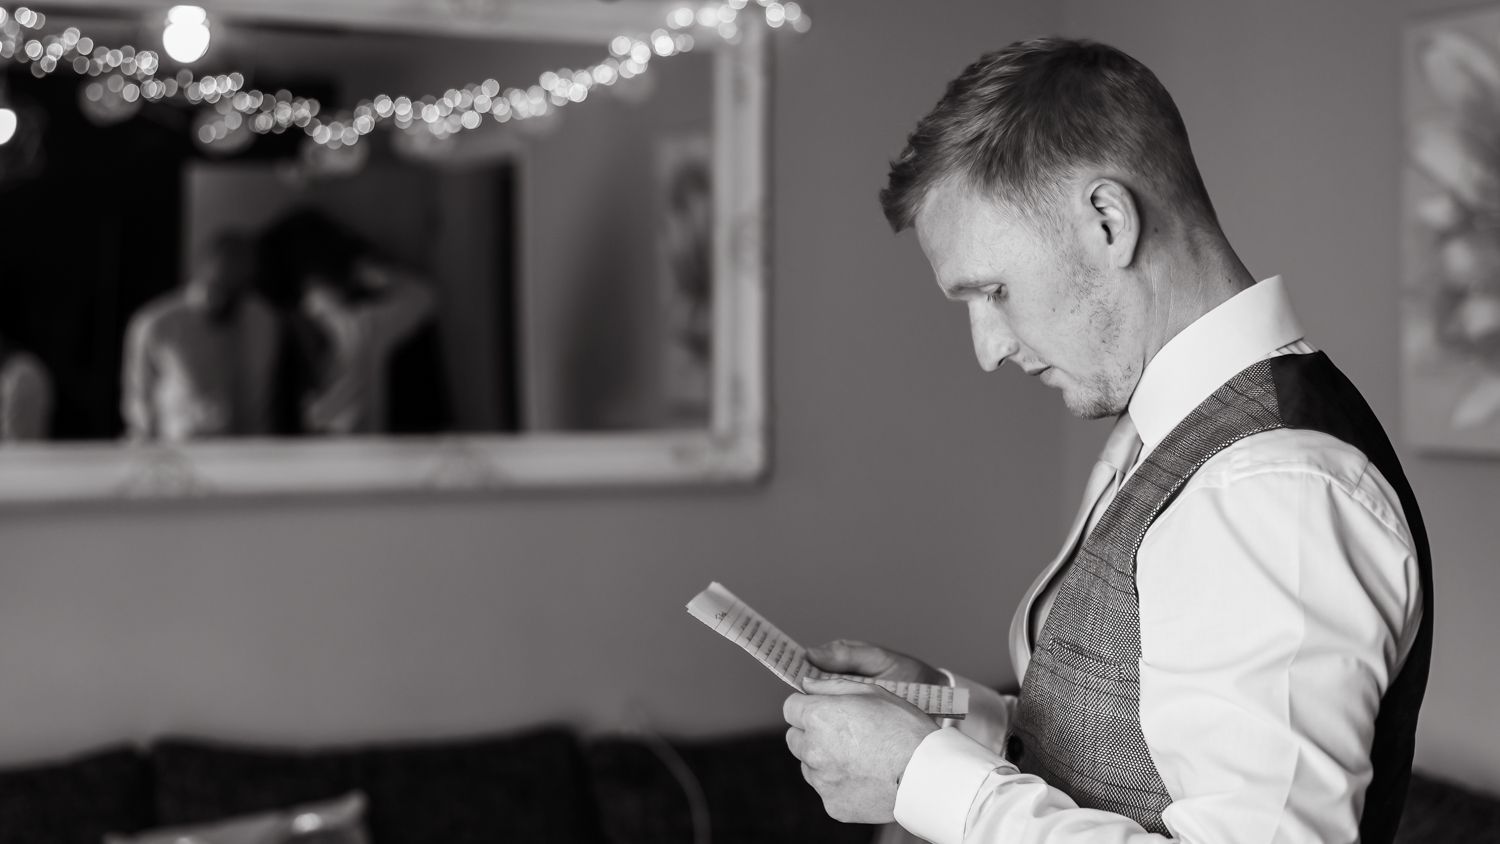 the groom reads a letter from his bride-to-be after getting ready on their wedding day. He's full of emotion and the groomsmen can be seen getting jackets reads in the reflection of the mirror.